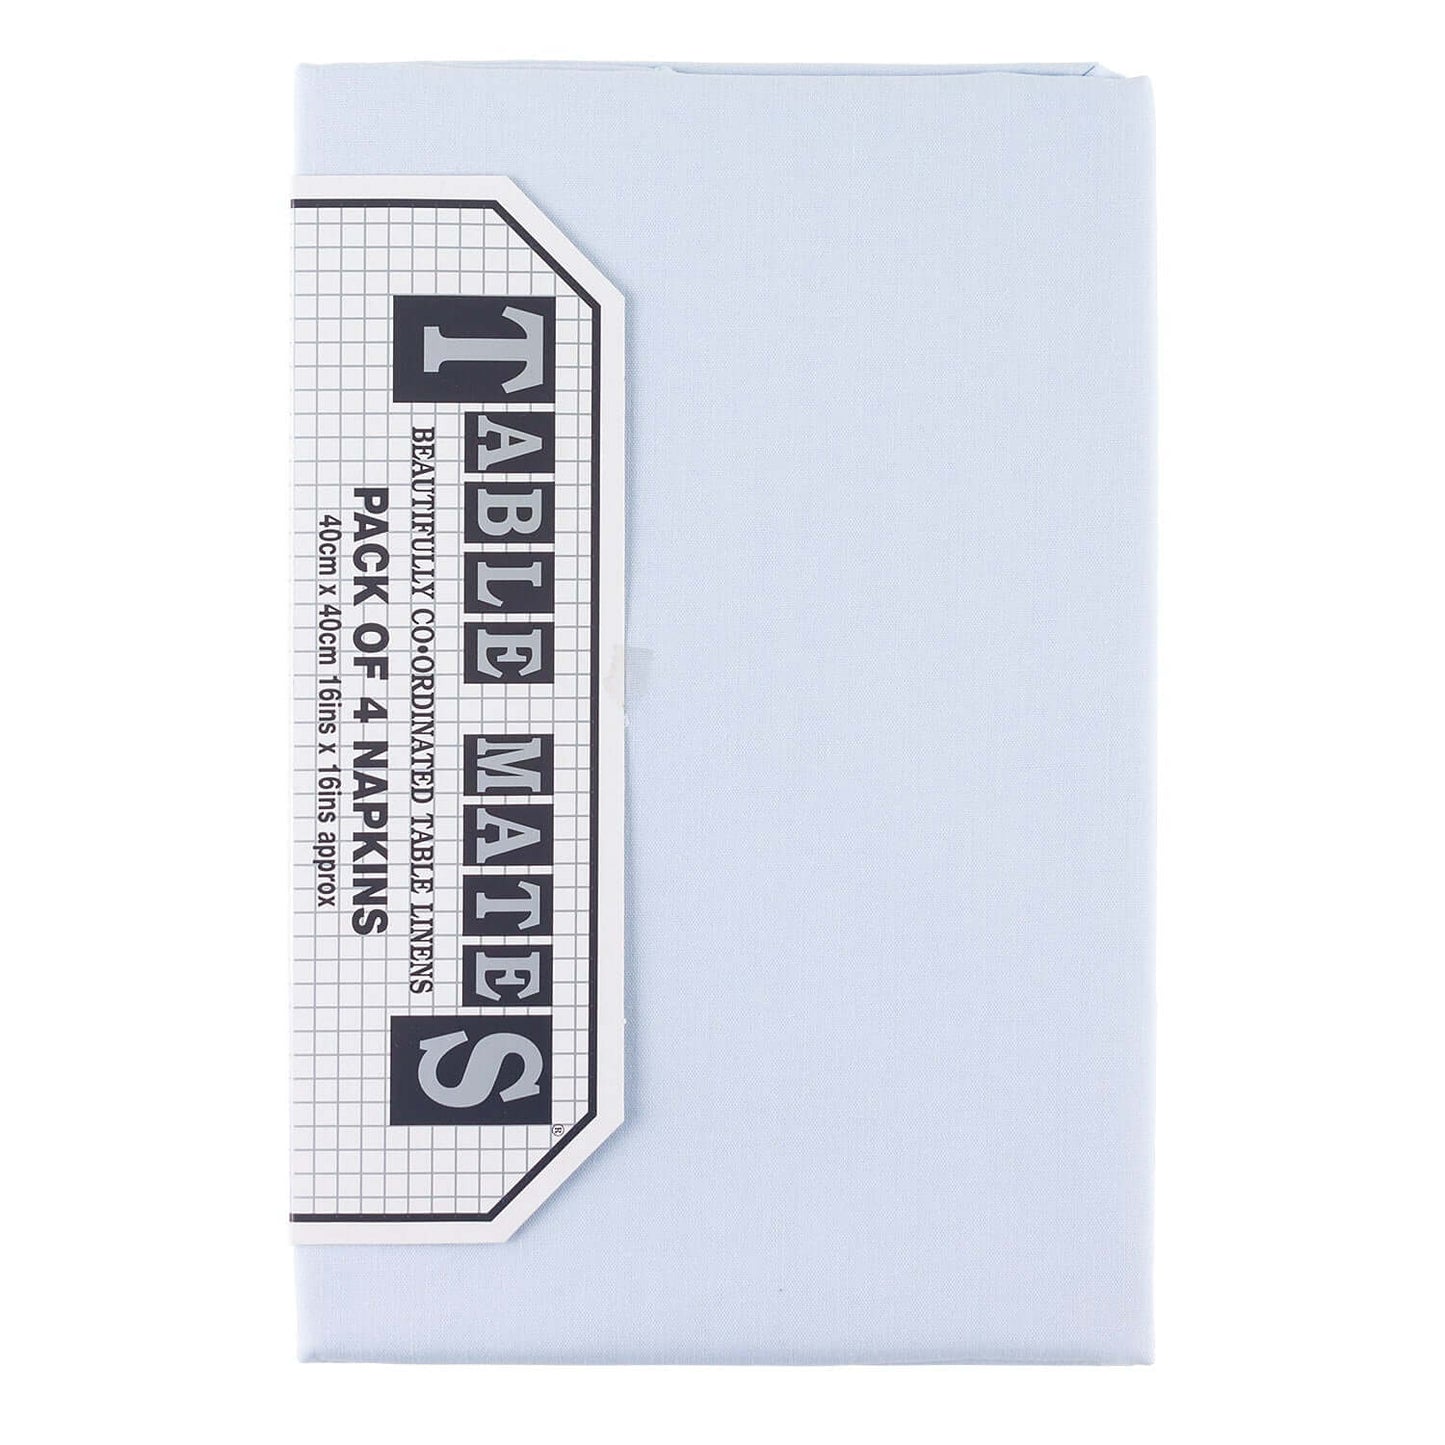 Tablemates Resuable Napkins (4 pack)